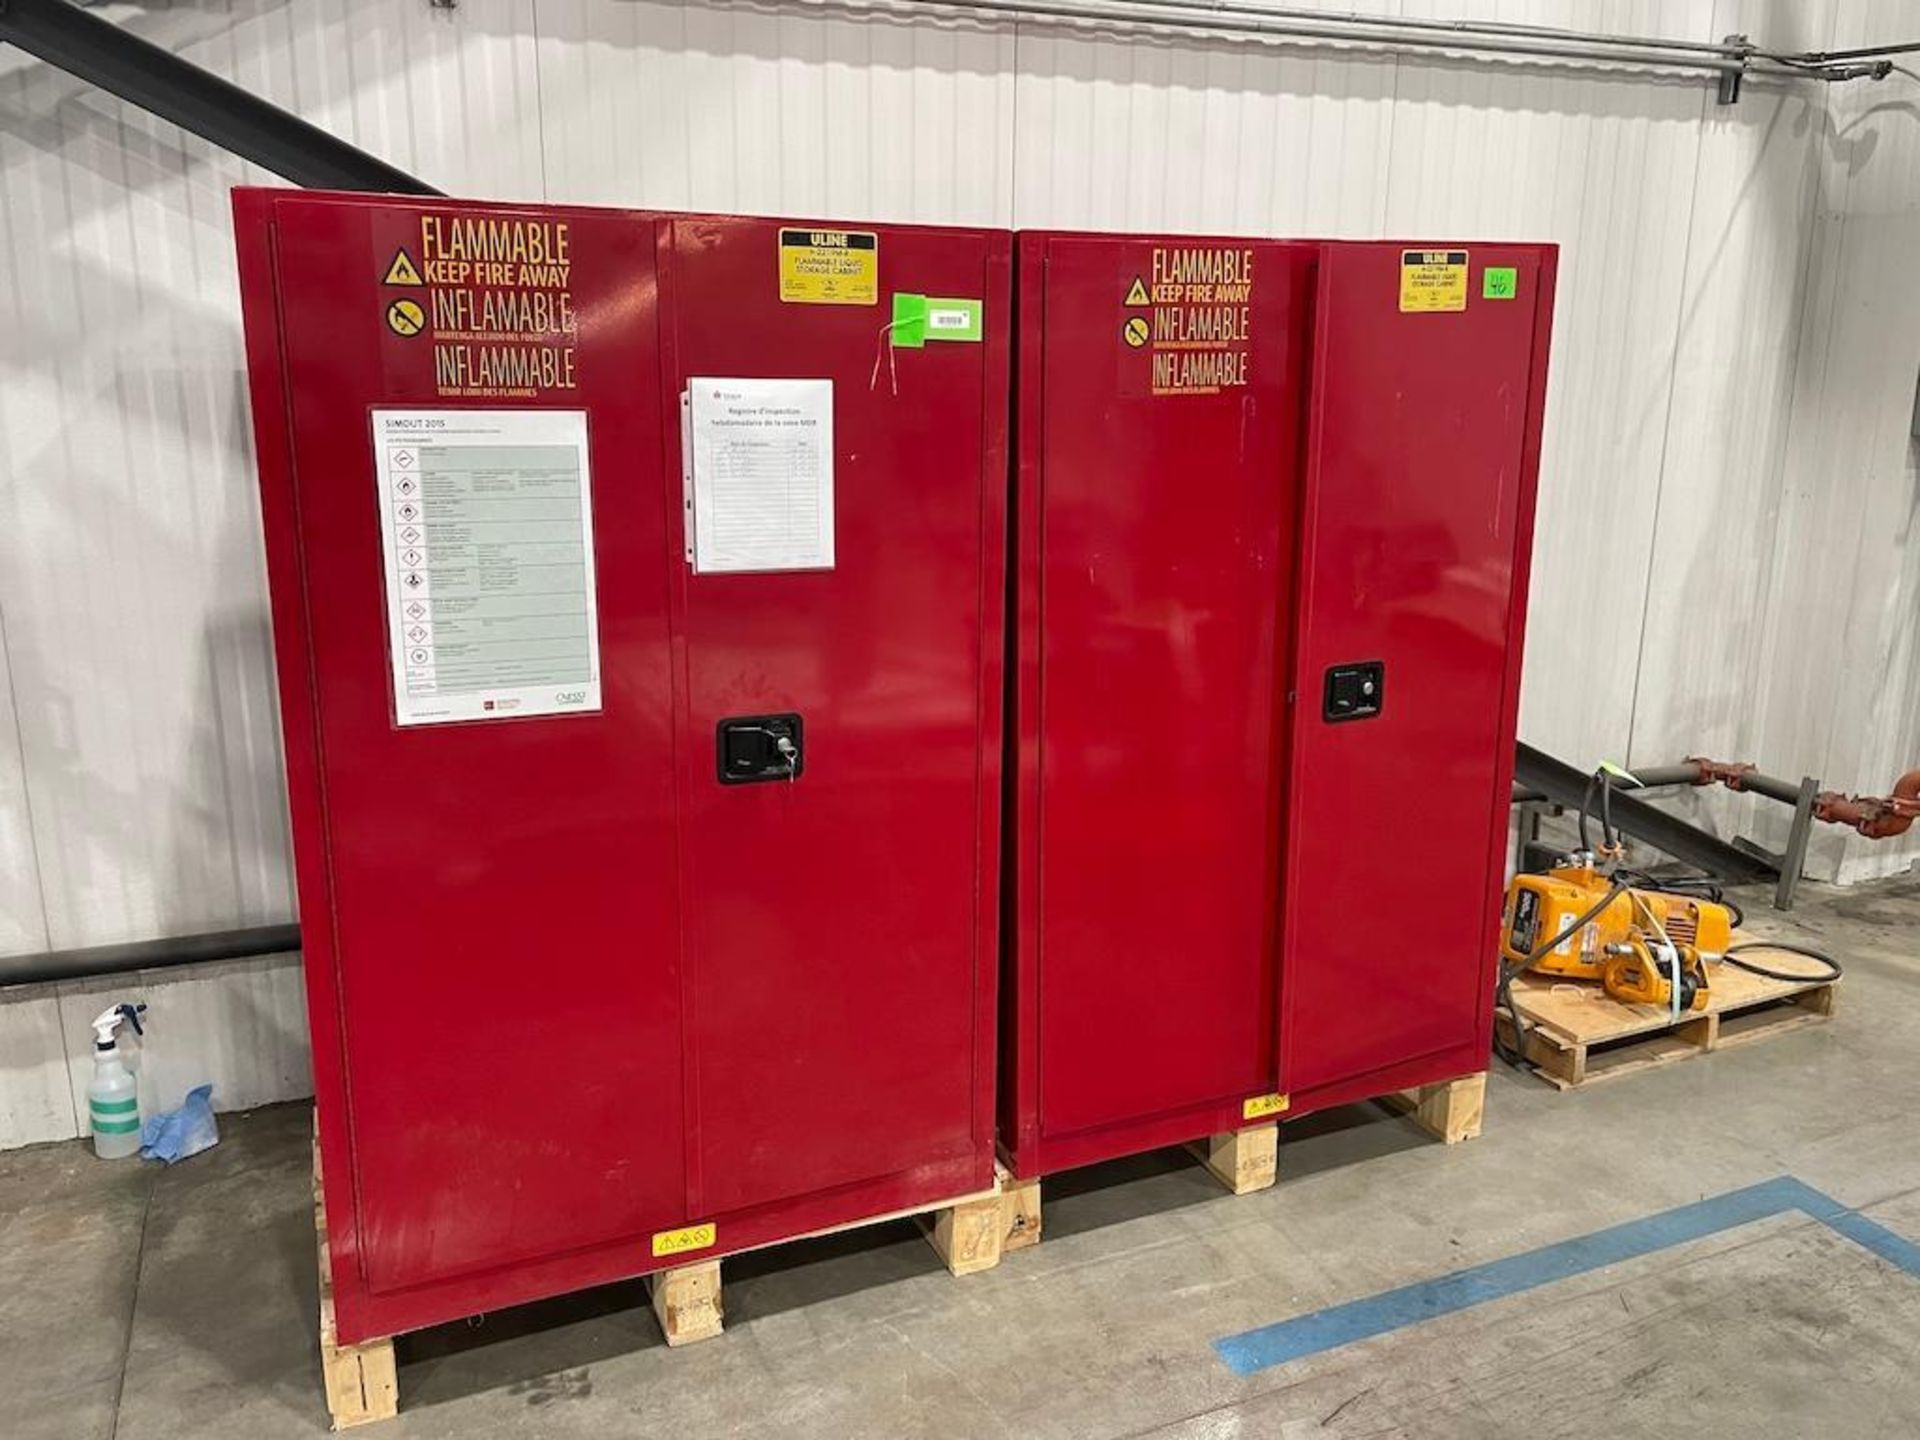 2 ULINE H-2219M-R FLAMMABLE LIQUID STORAGE CABINETS [TROIS RIVIERES] *PLEASE NOTE, EXCLUSIVE RIGGING